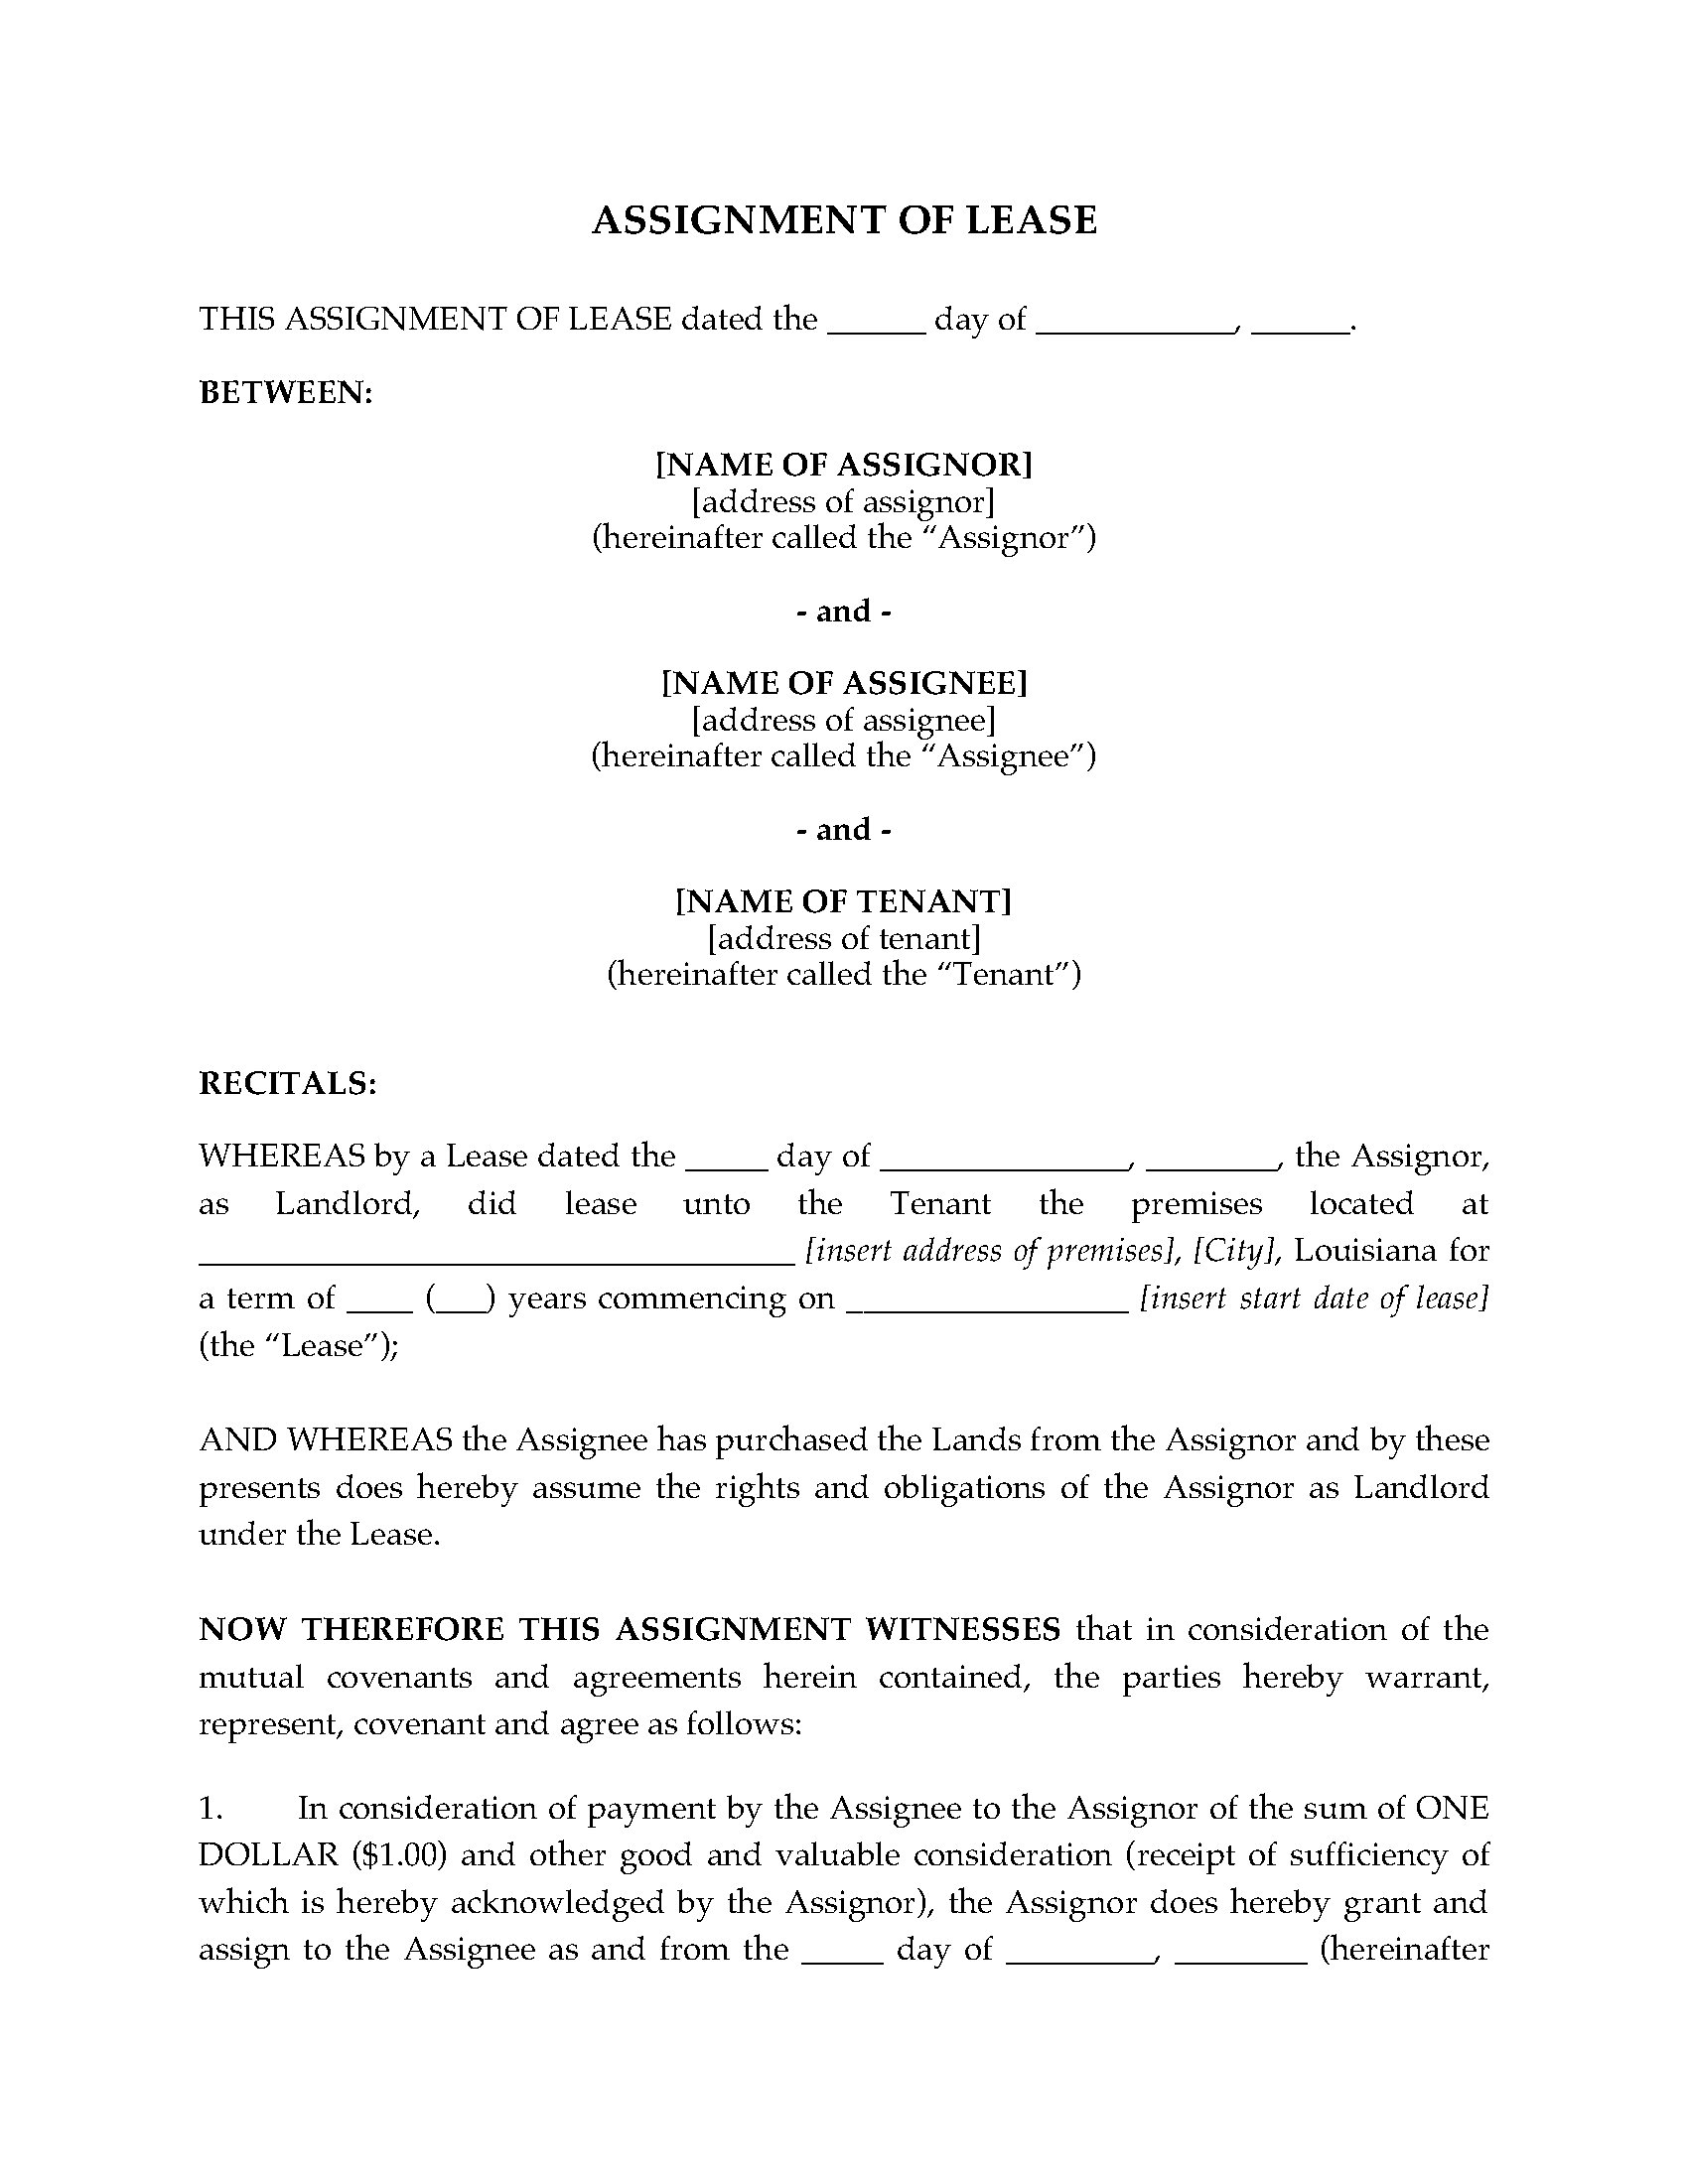 assignment of lease by landlord form